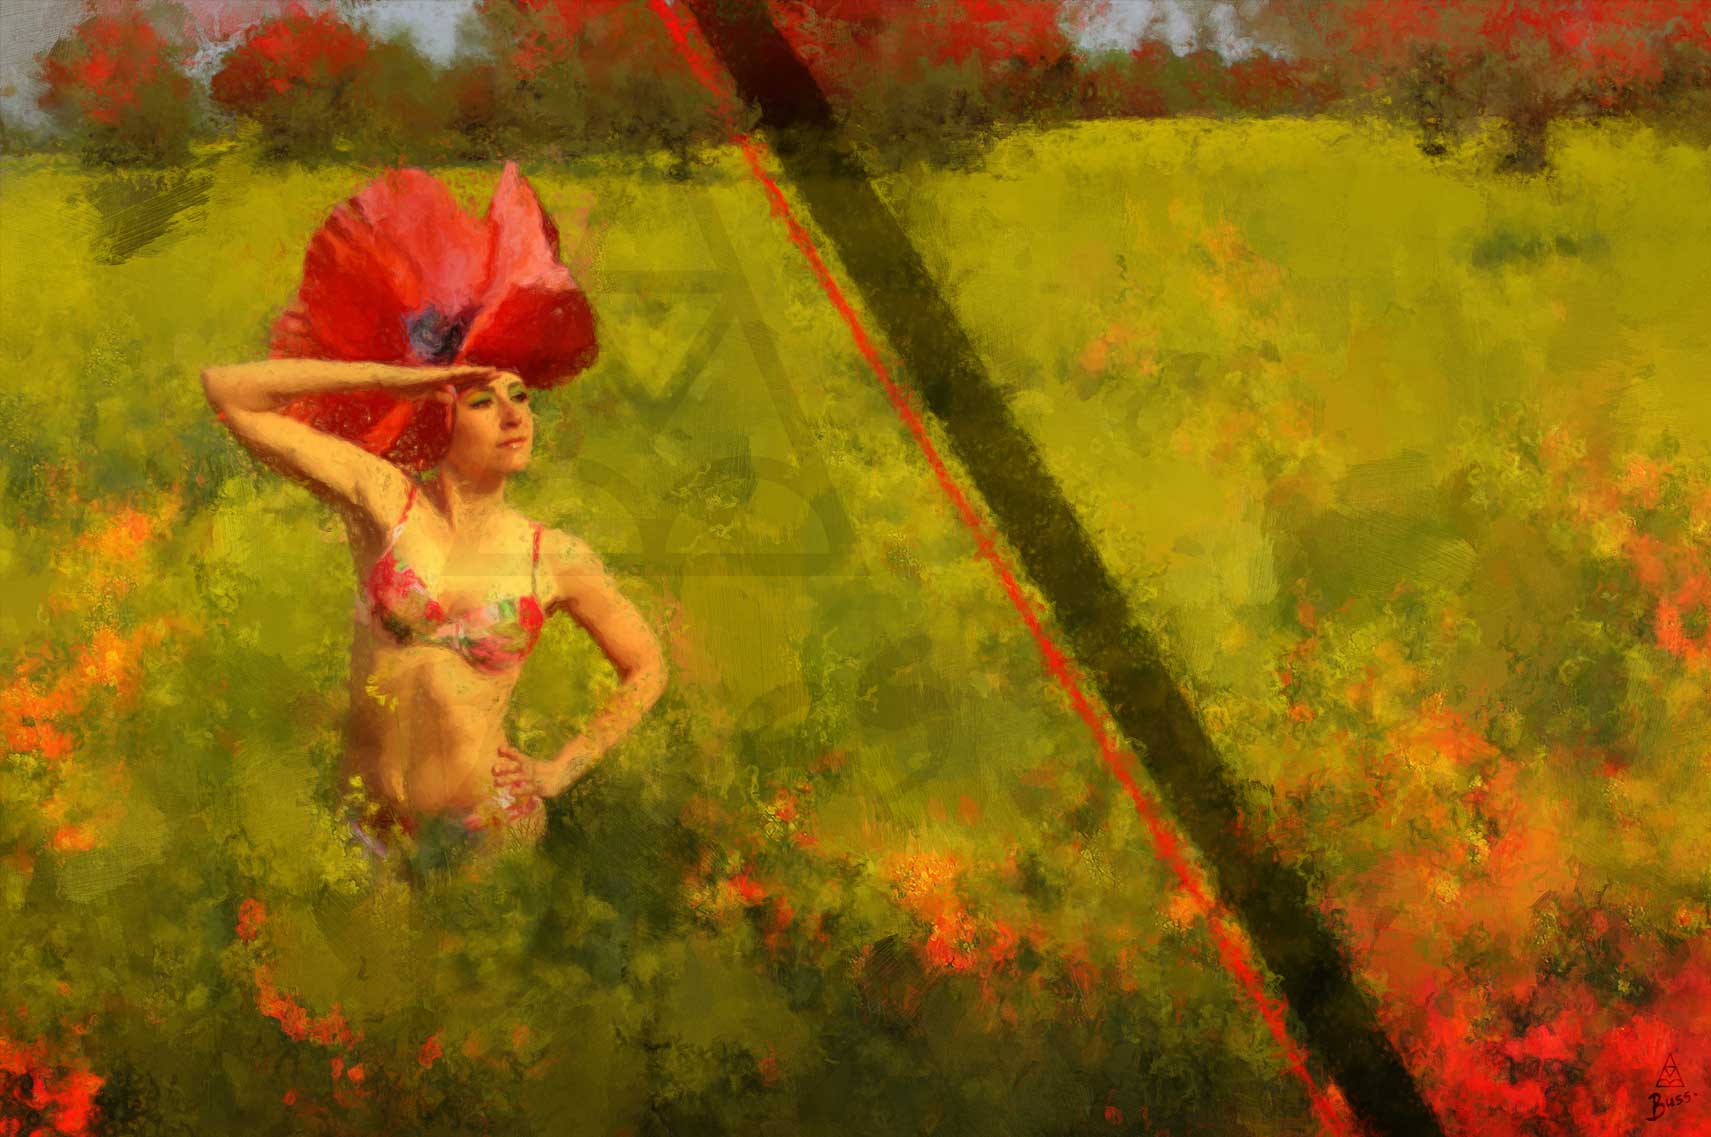 Painting of girl with a Poppy Headdress, Busby Berkeley, Technicolor, Digital Painting by Anna-Marie Buss